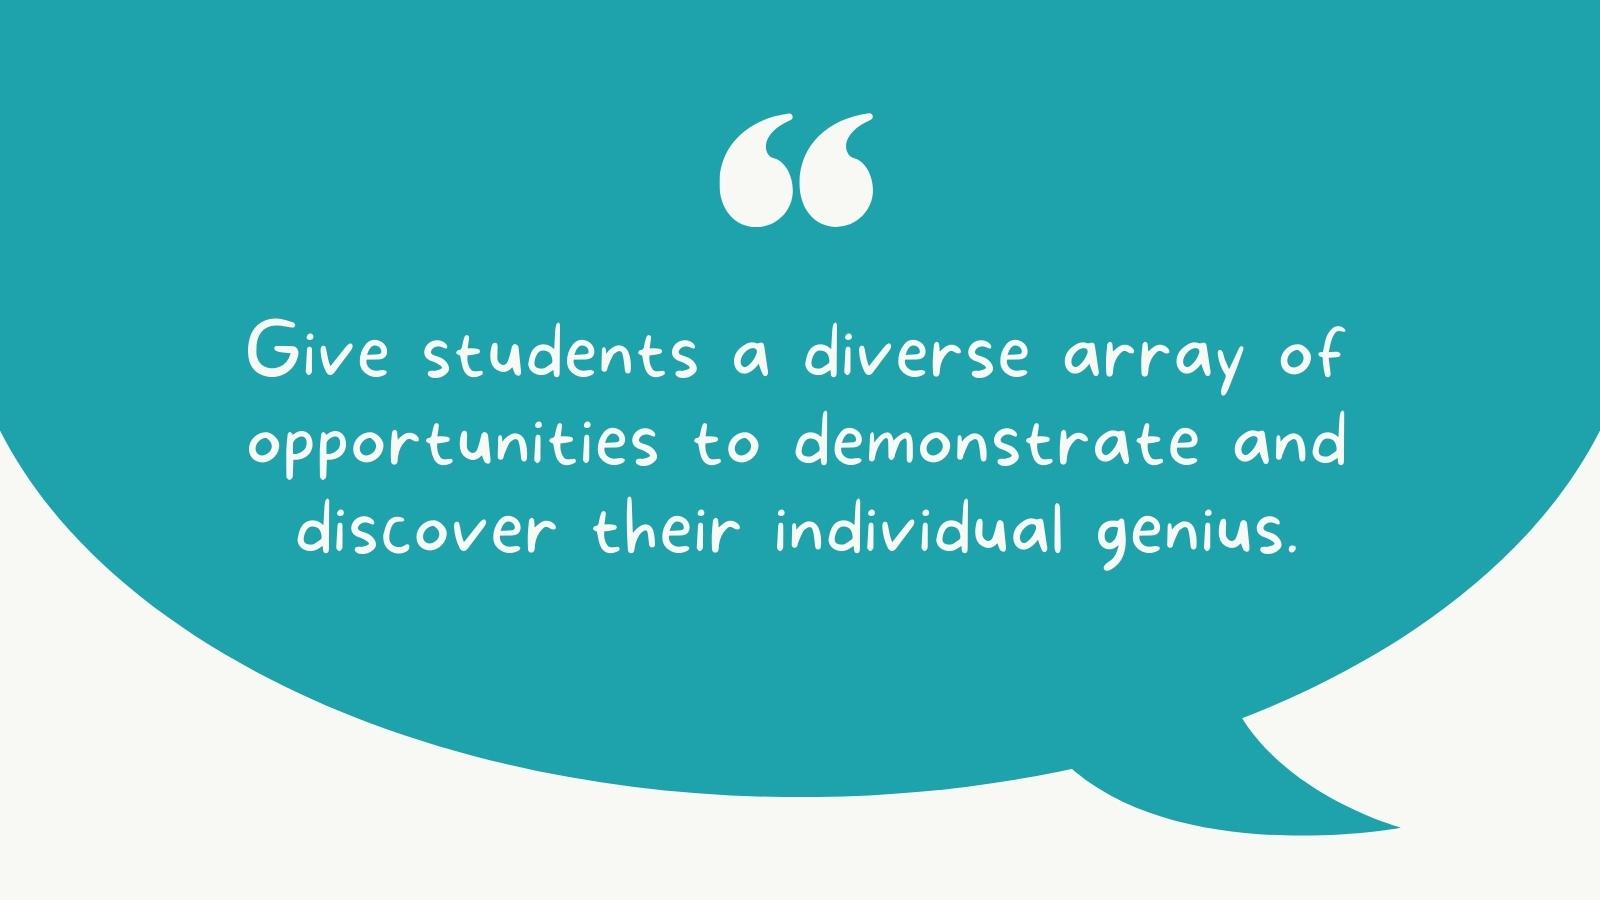 Give students a diverse array of opportunities to demonstrate and discover their individual genius.